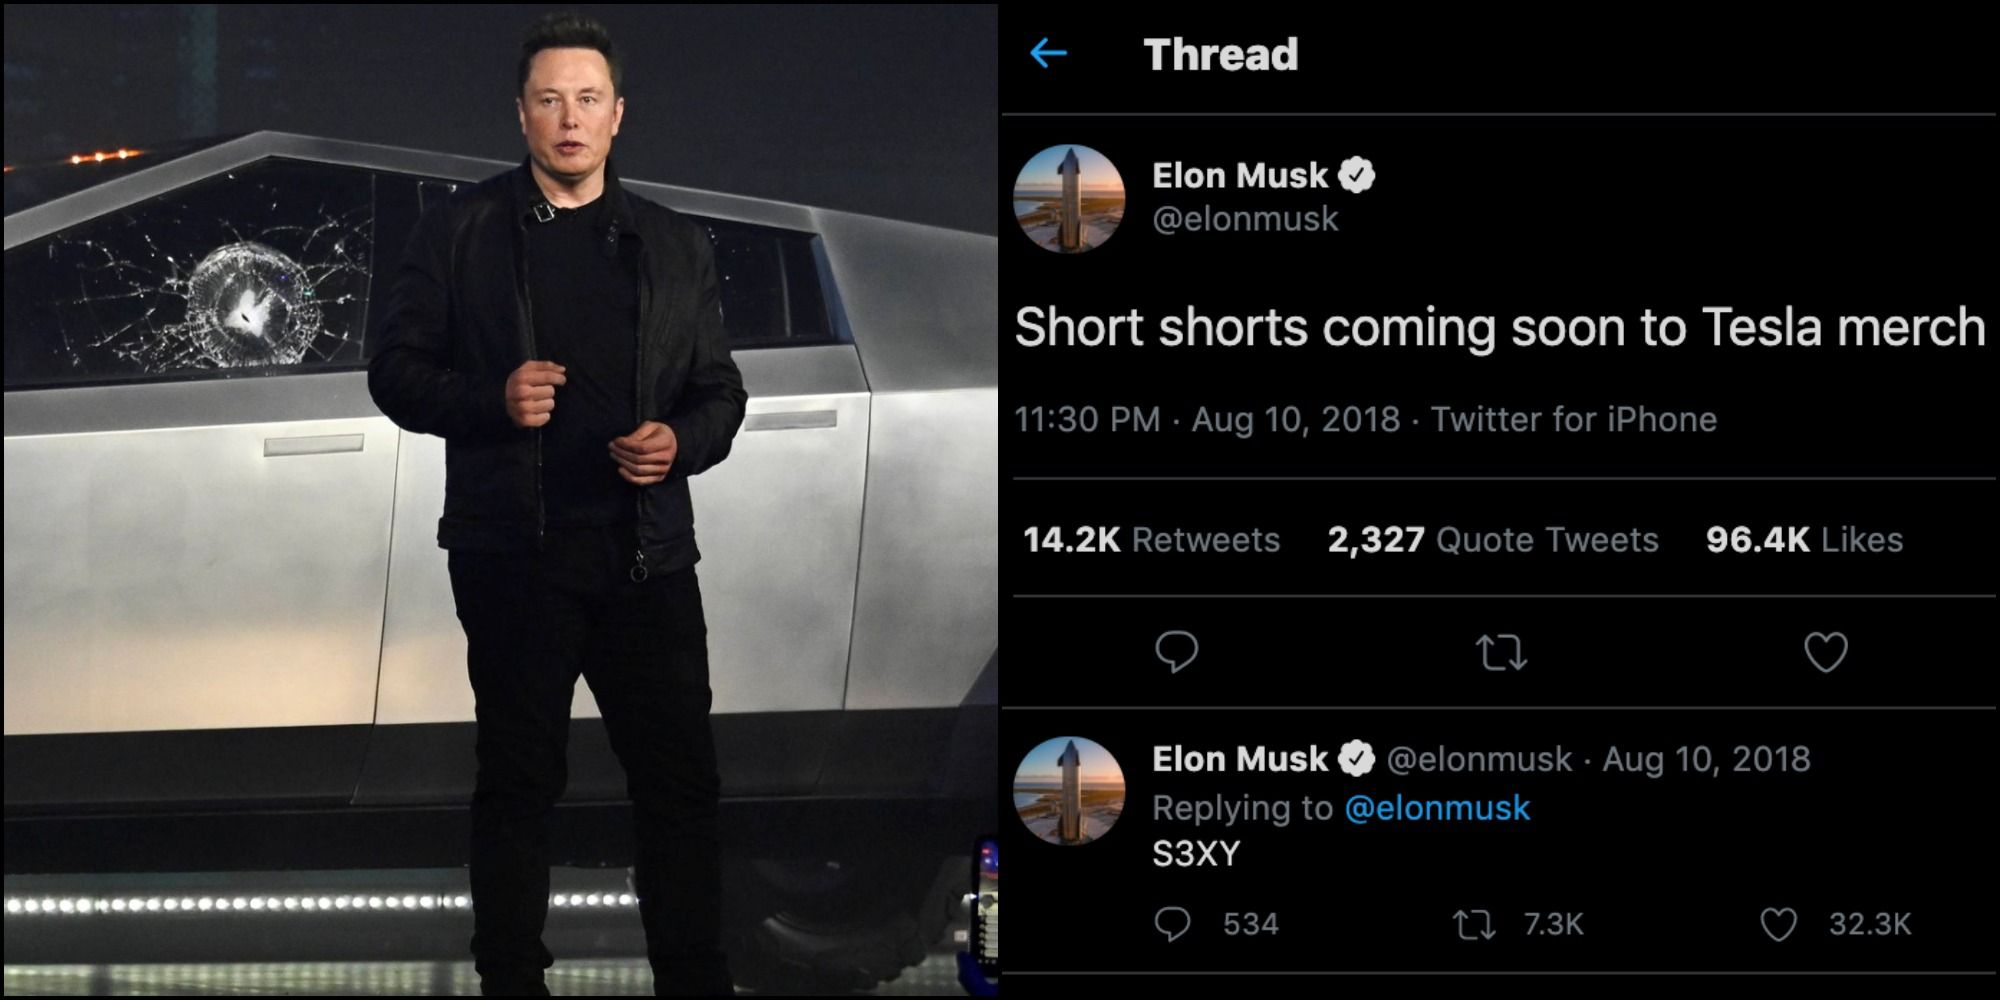 Elon Musk S 15 Most Chaotic Tweets Ranked Screenrant